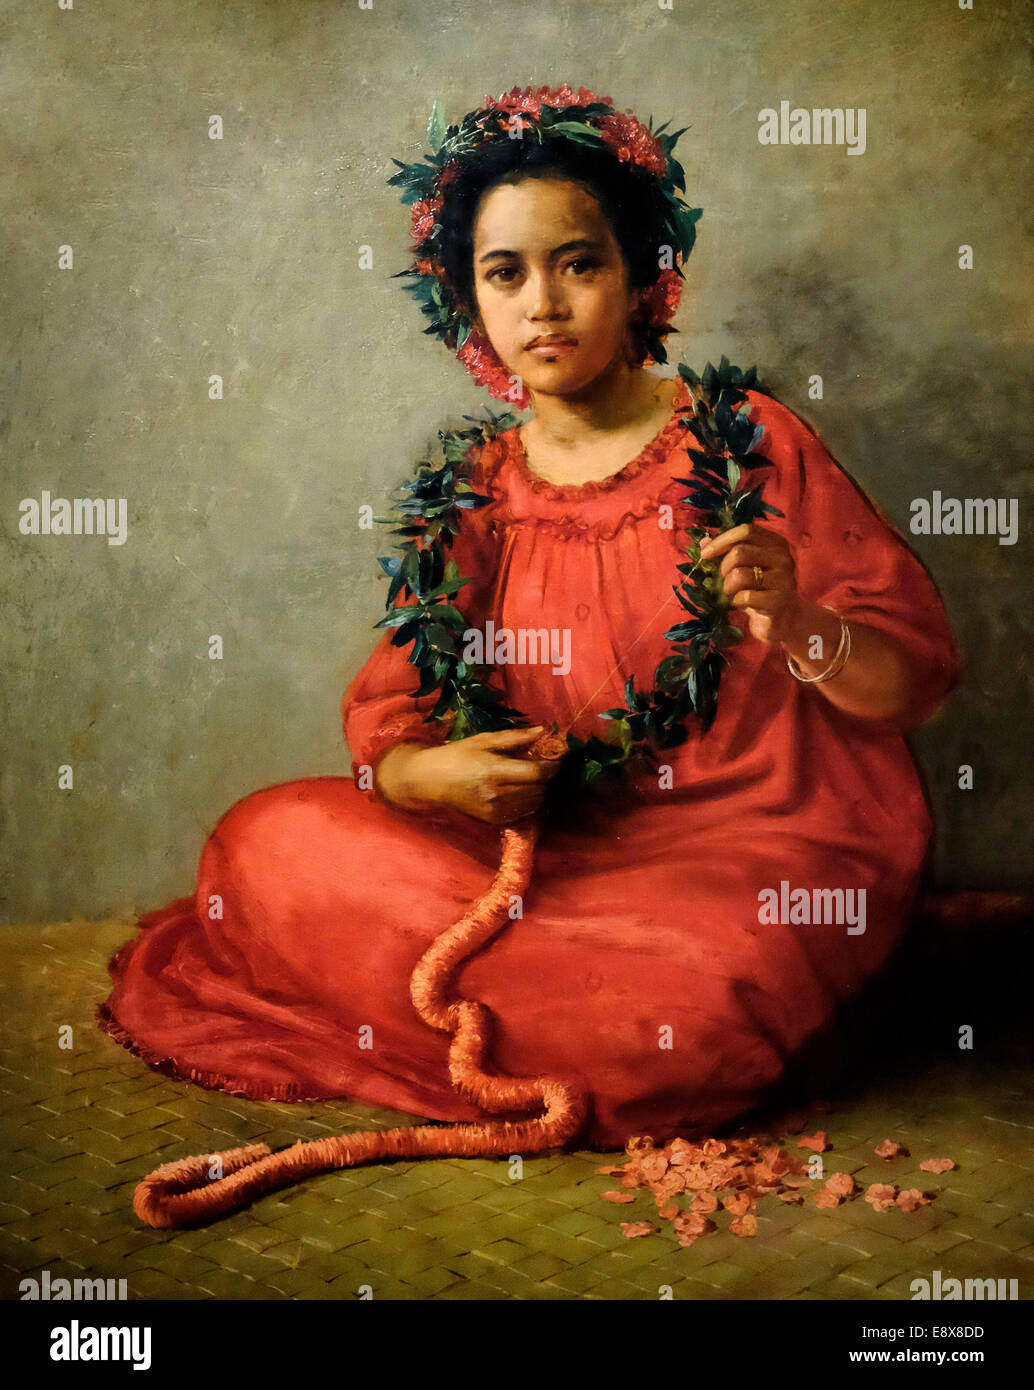 The Lei Maker 1901 Theodore Wores Stock Photo